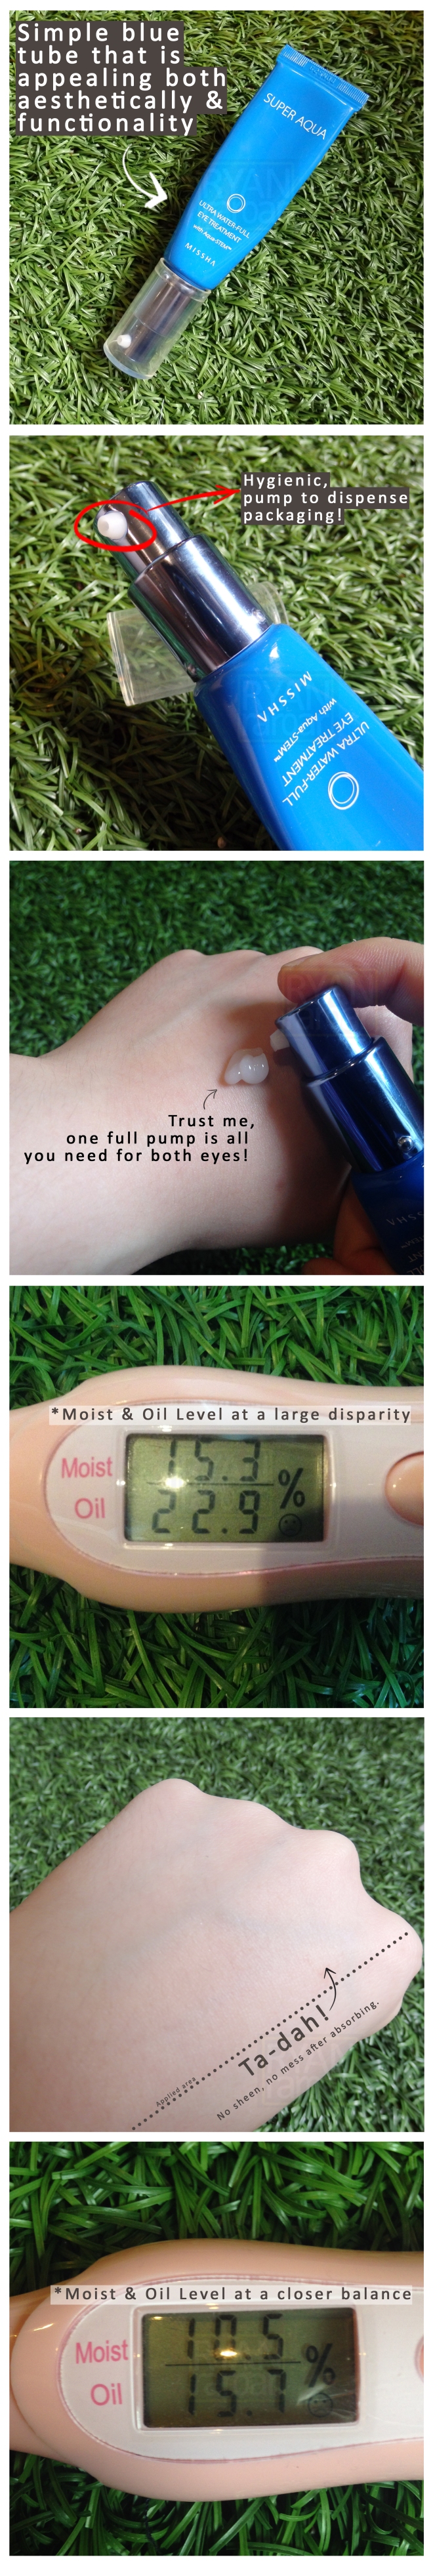 (I tested the Ultra Water-Full Eye Treatment on the back of my hand to see how it performs)